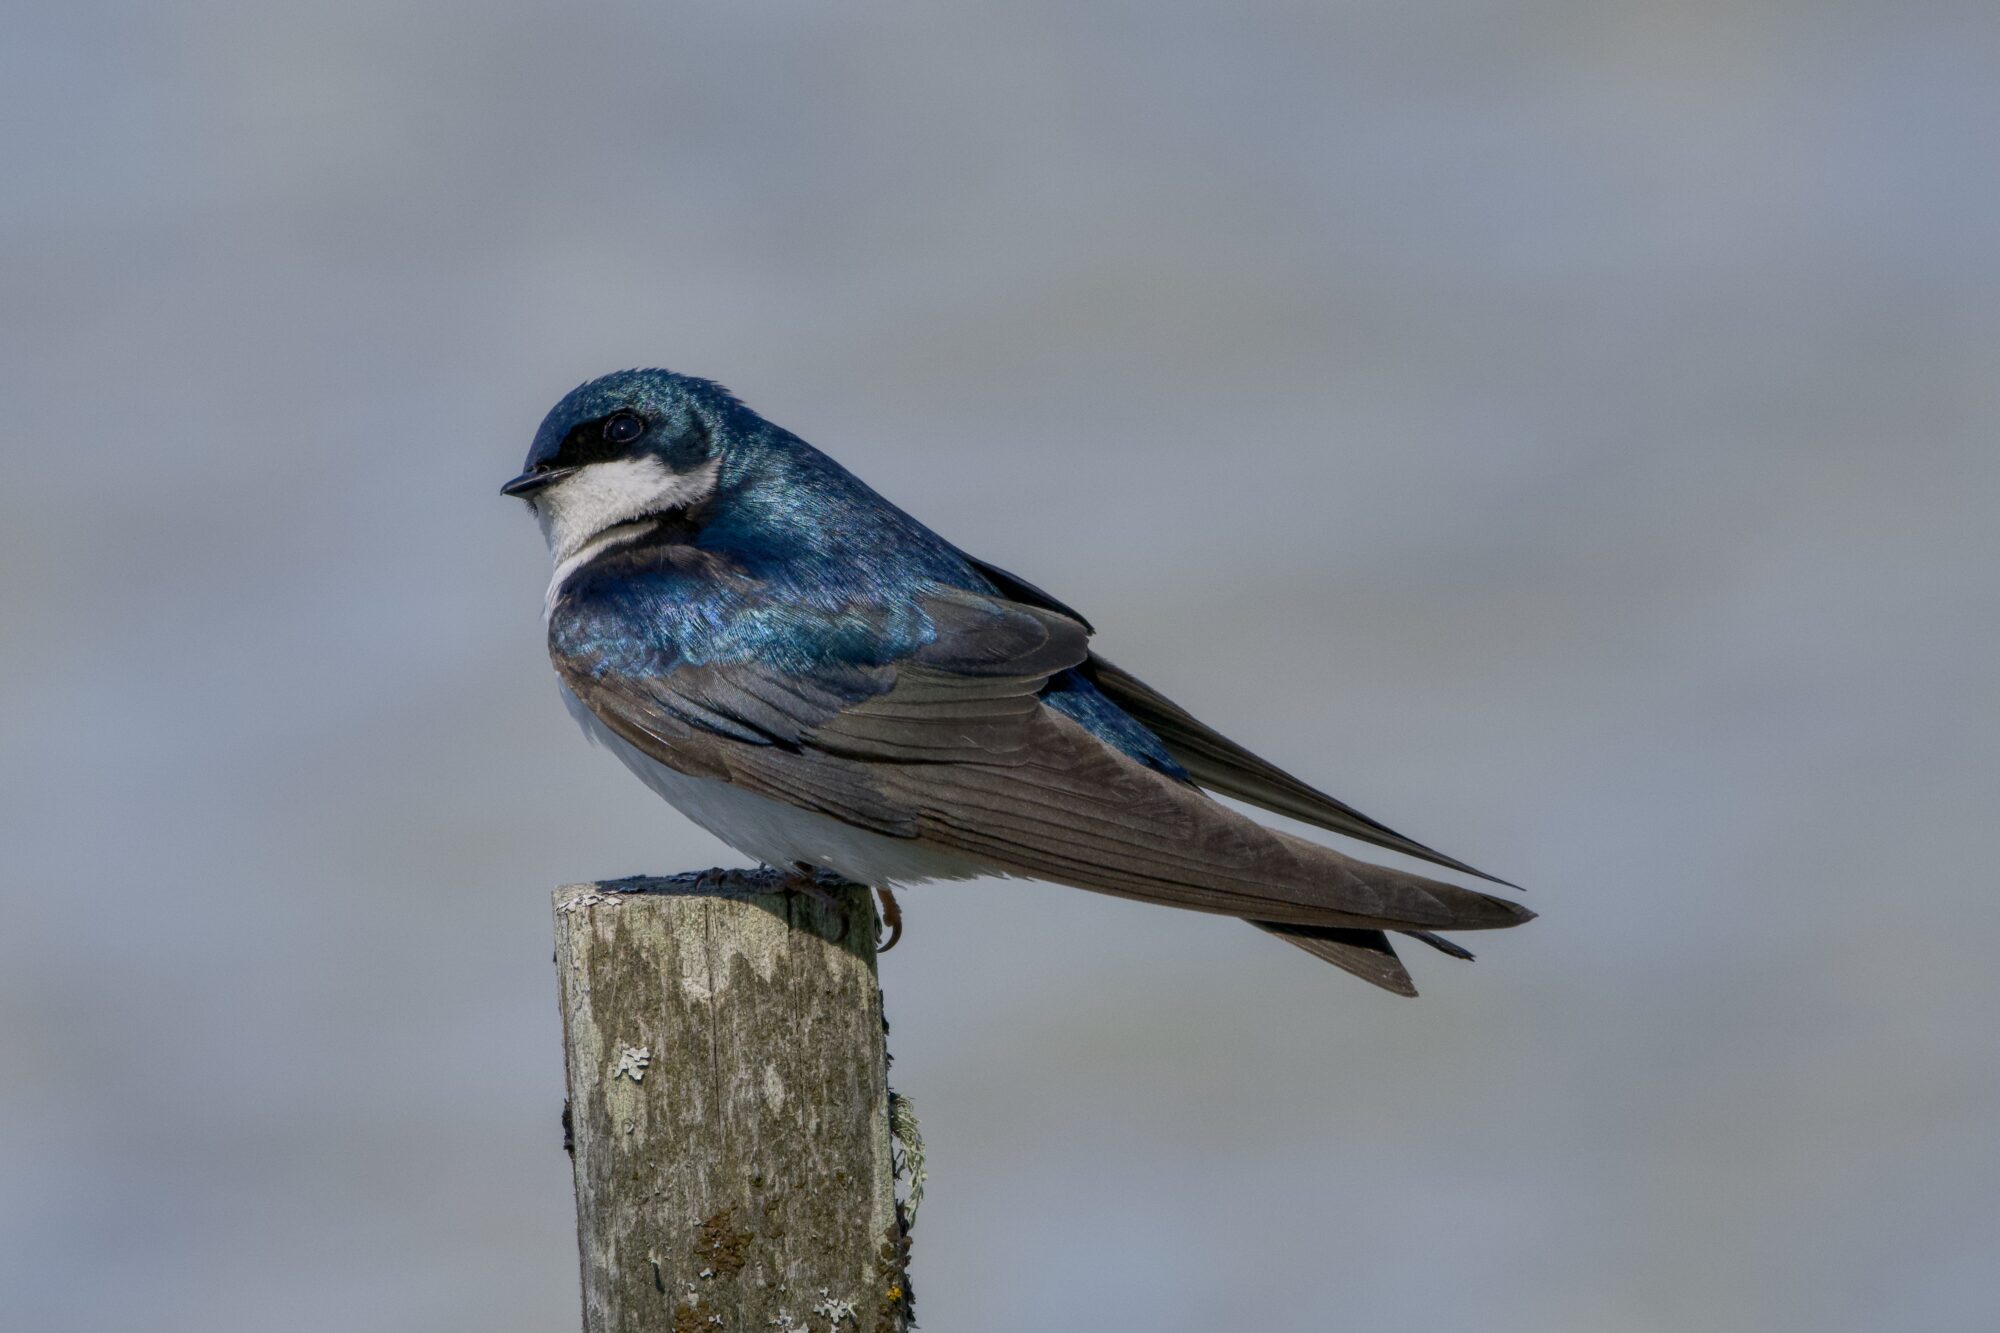 A Tree Swallow is sitting on a wooden post, head tilted. It is very shiny. The background is out-of-focus greyish water